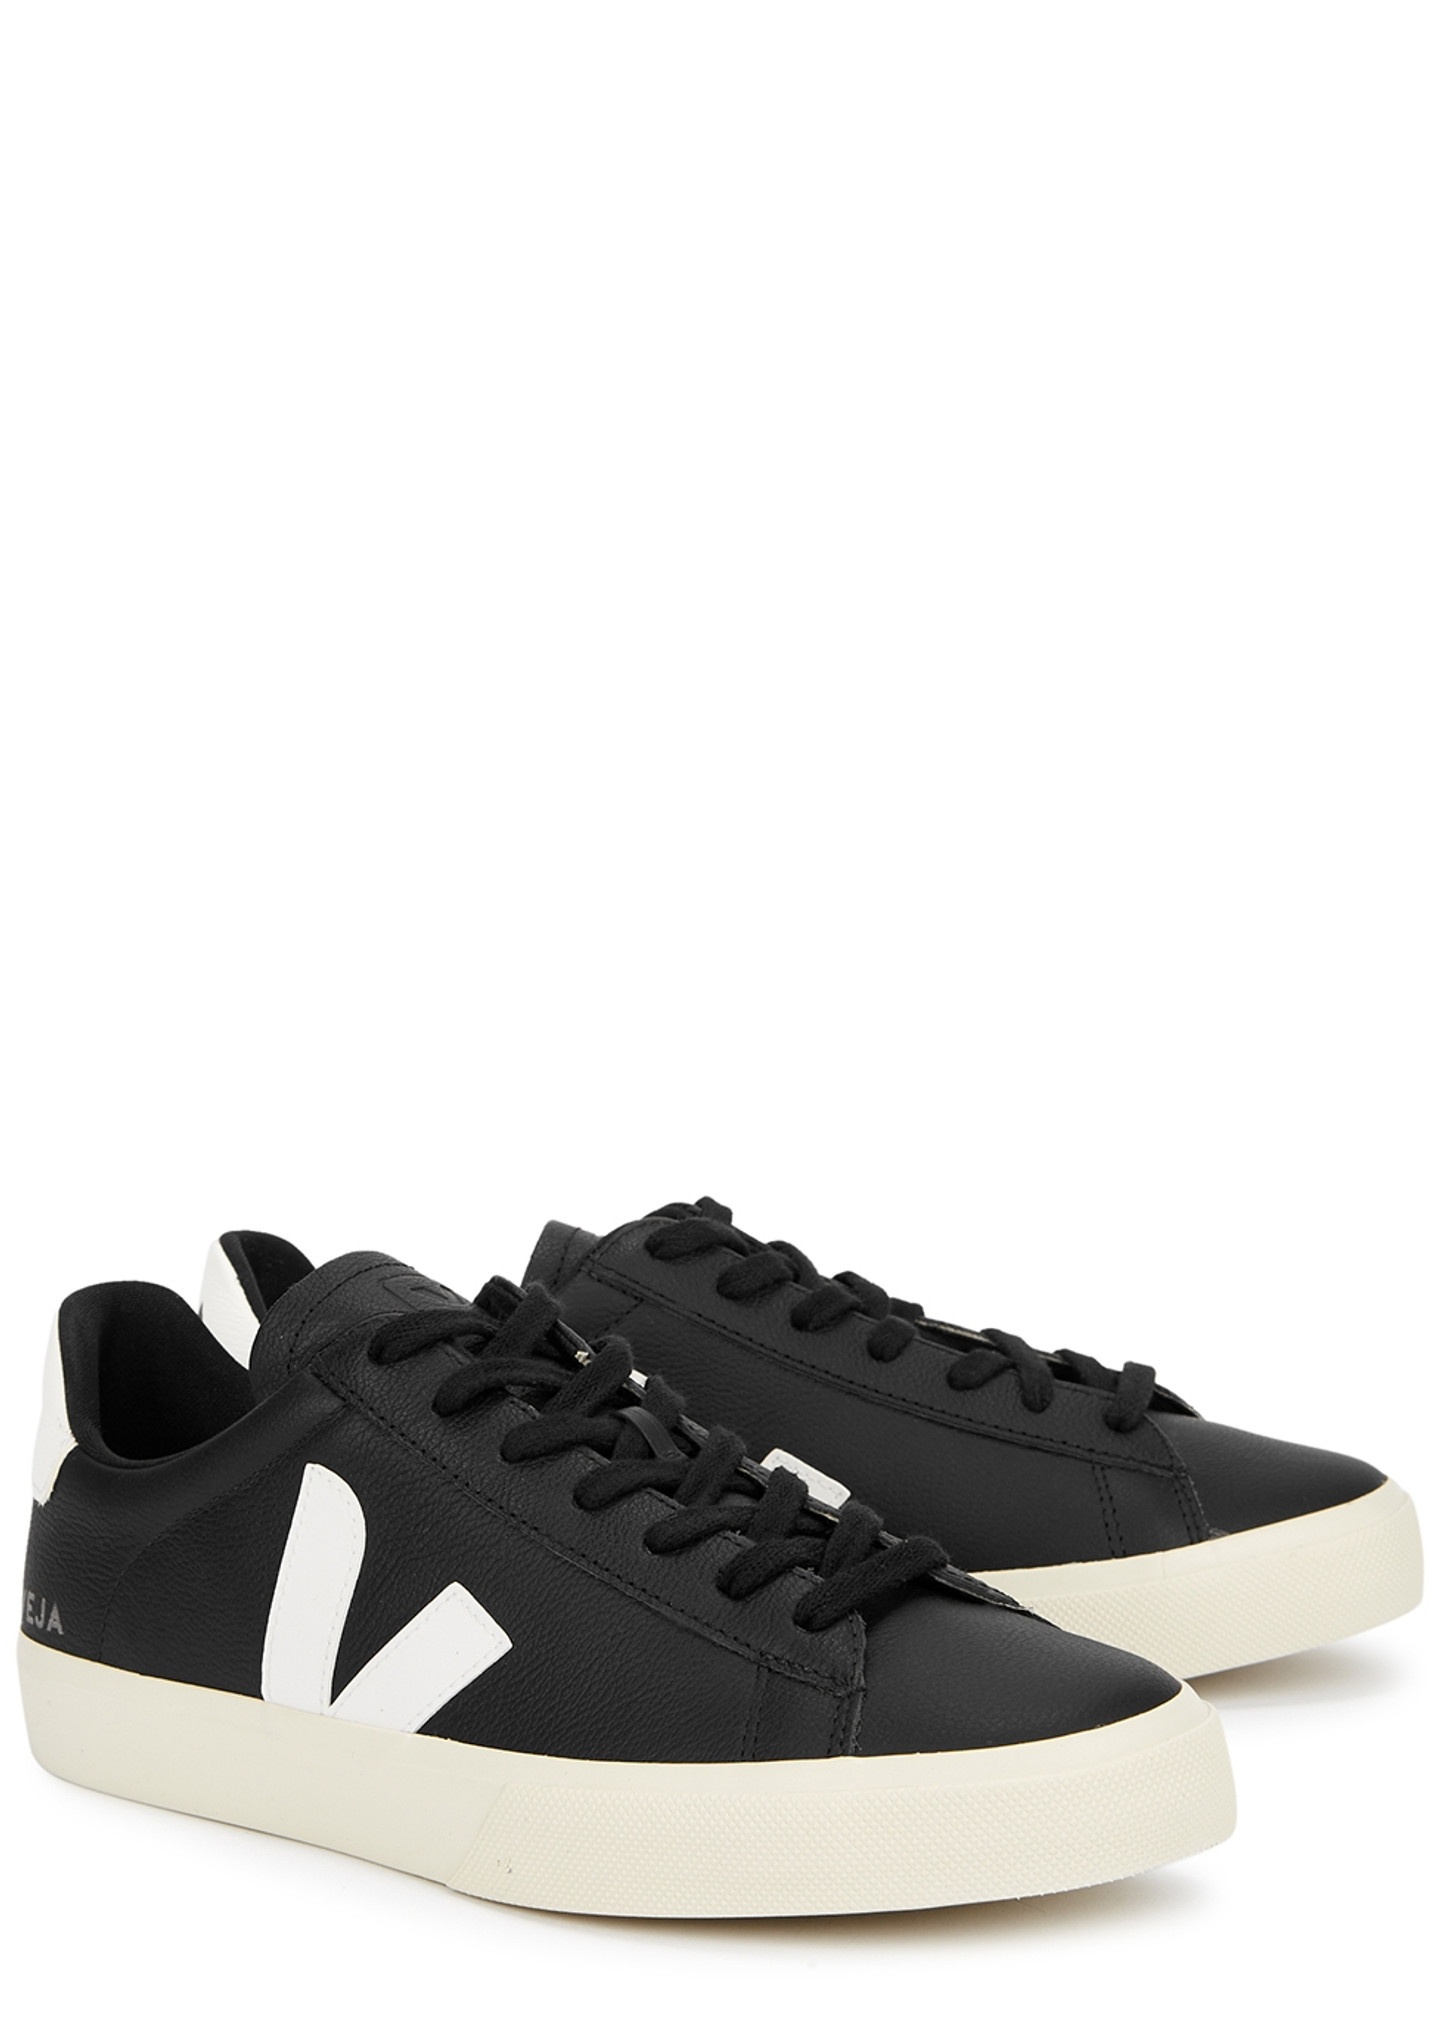 Campo black leather sneaker - 2